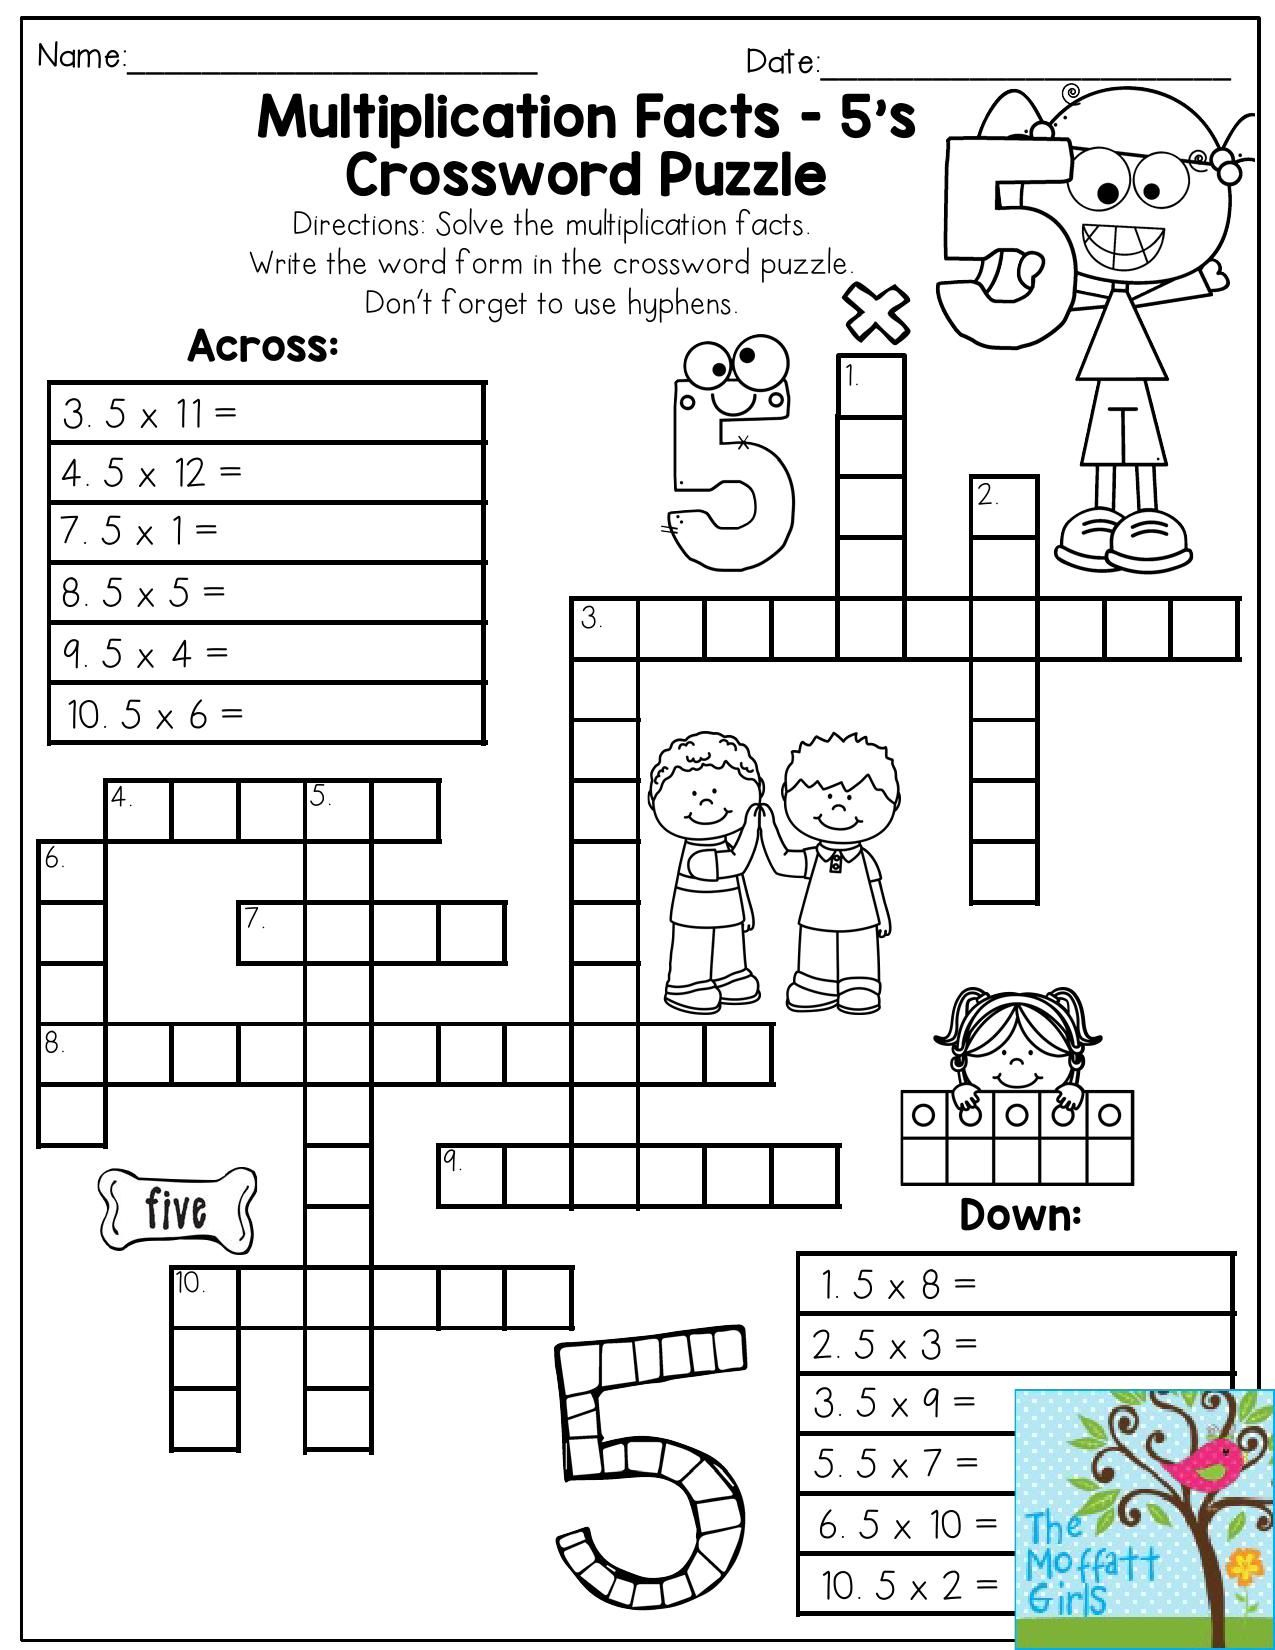 20 Math Puzzles To Engage Your Students Prodigy Printable Crossword 